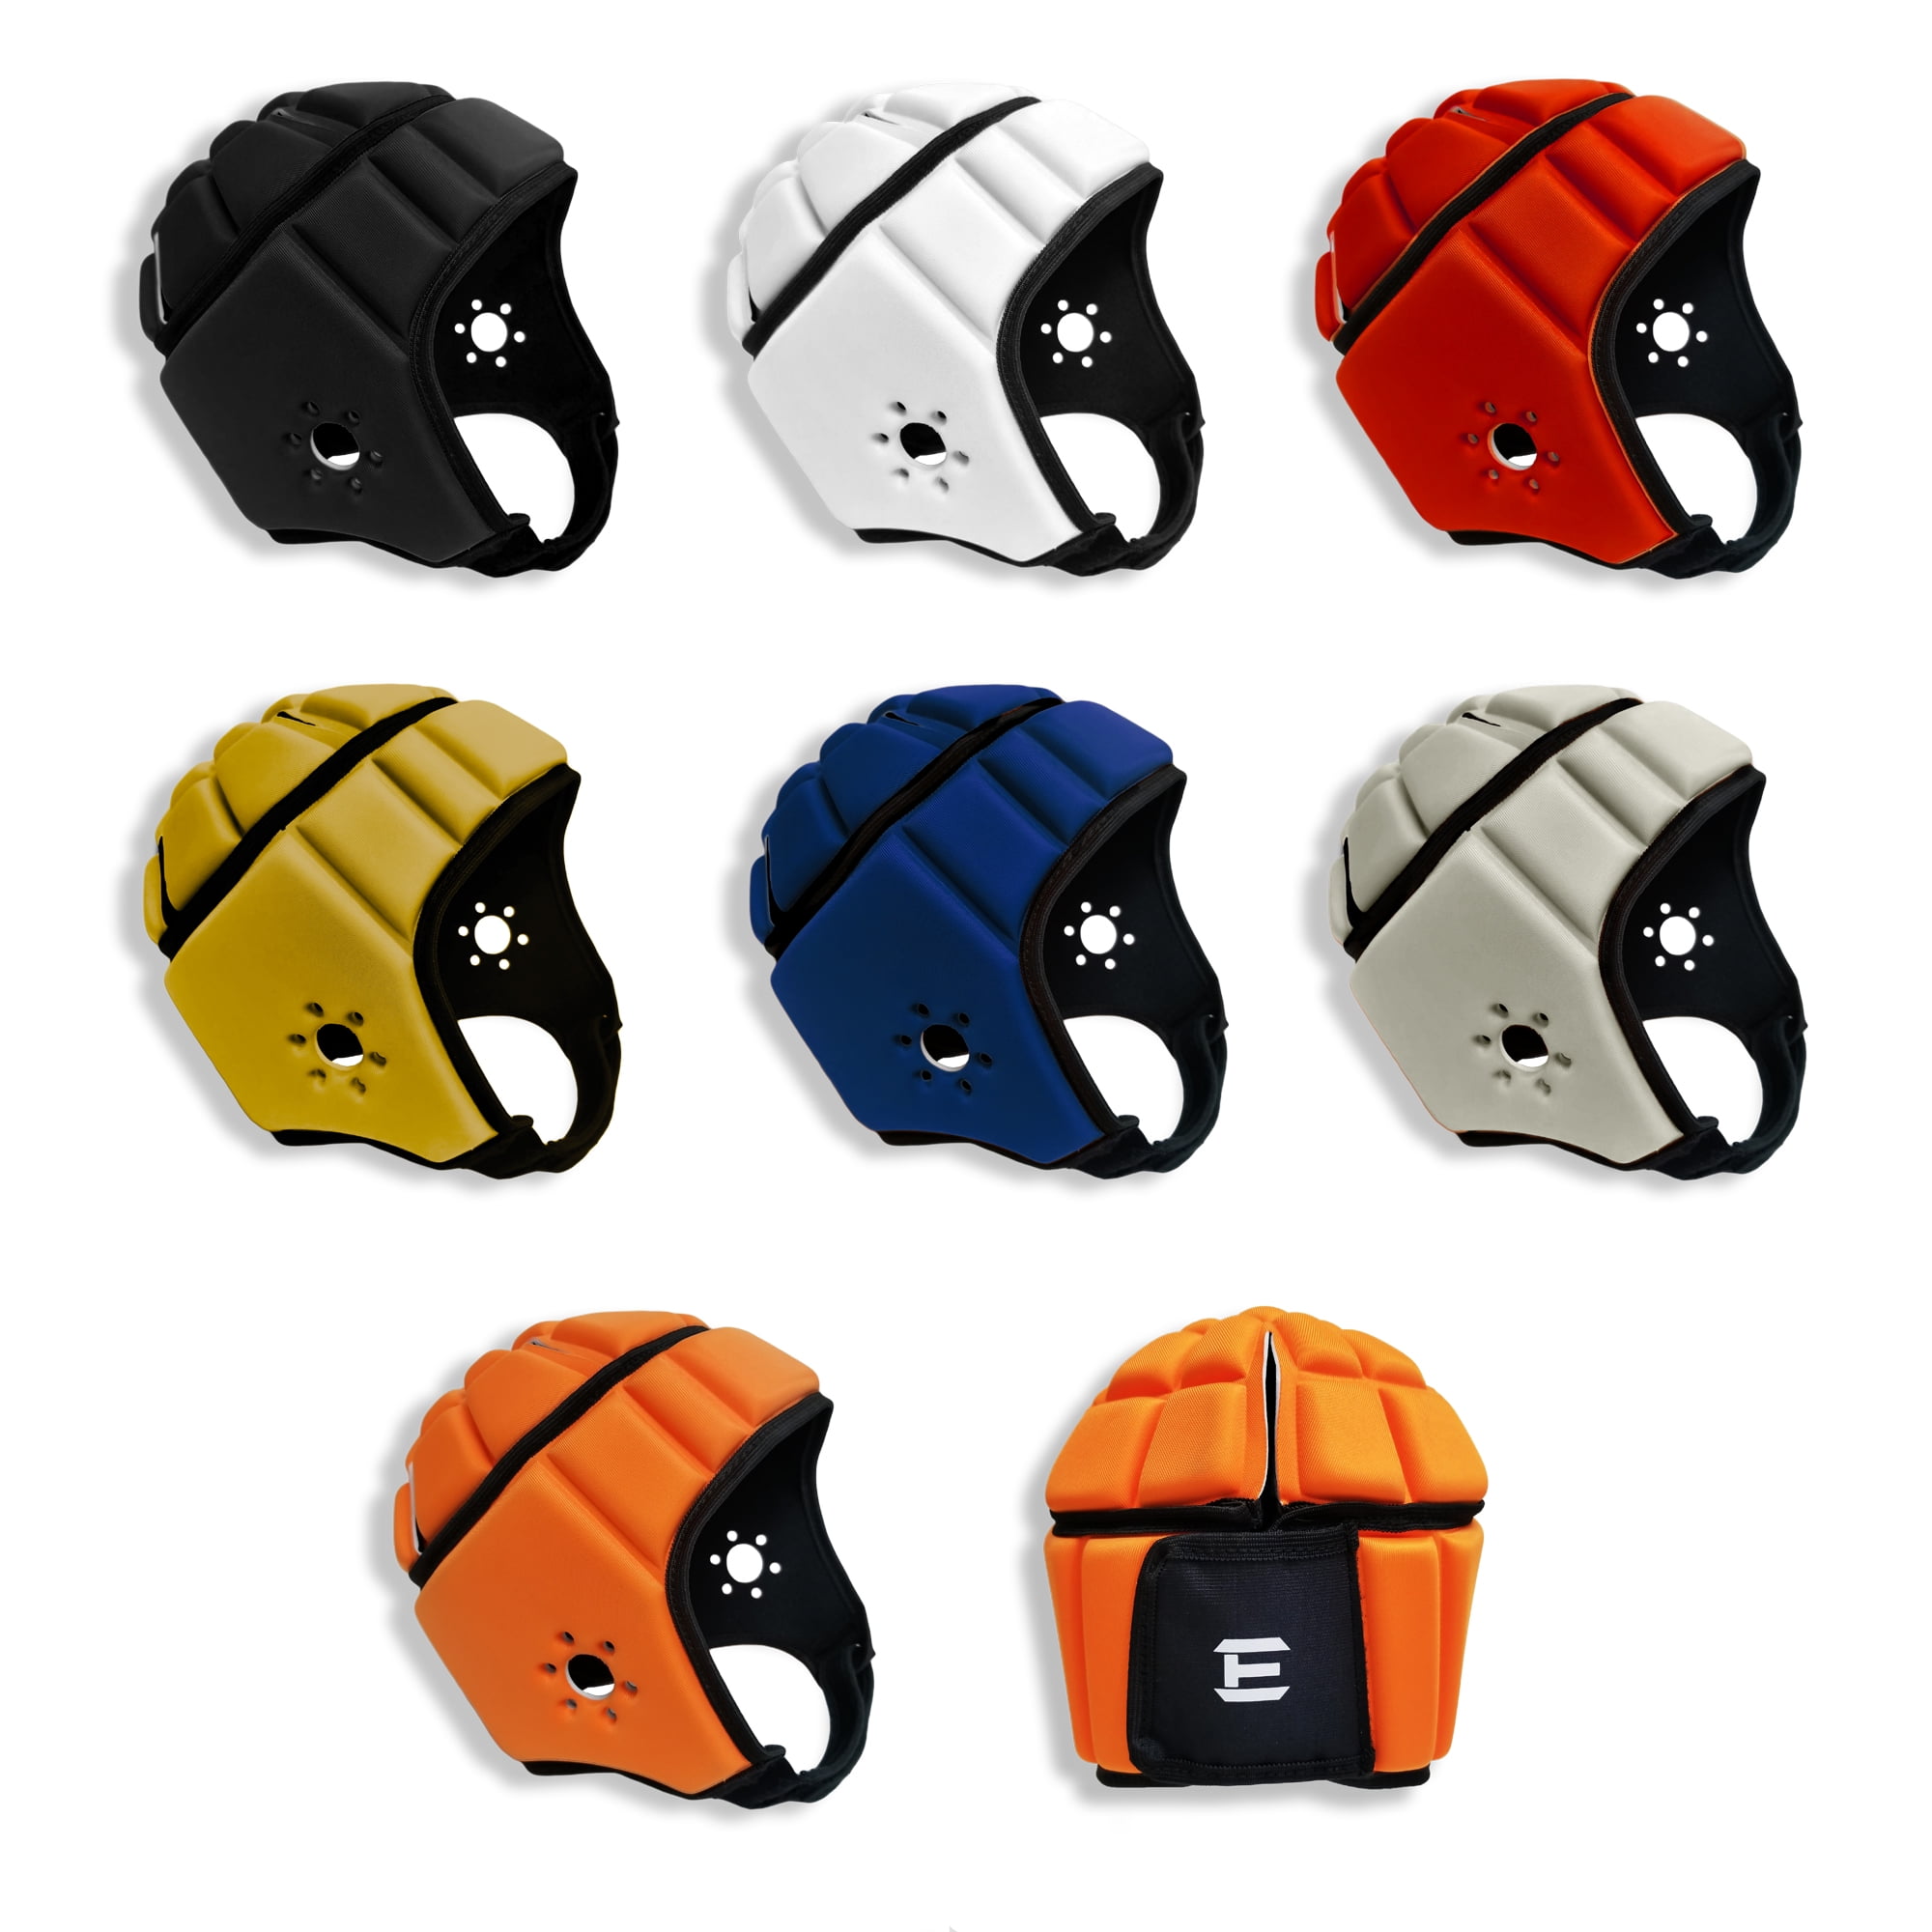 Epilepsy Head Fall Protection for Youth & Adult Goalkeeper Soccer Lacrosse Rugby Lixada Rugby Helmet Headguard,Adjustable Soft Padded Headgear Protection for Flag Football 